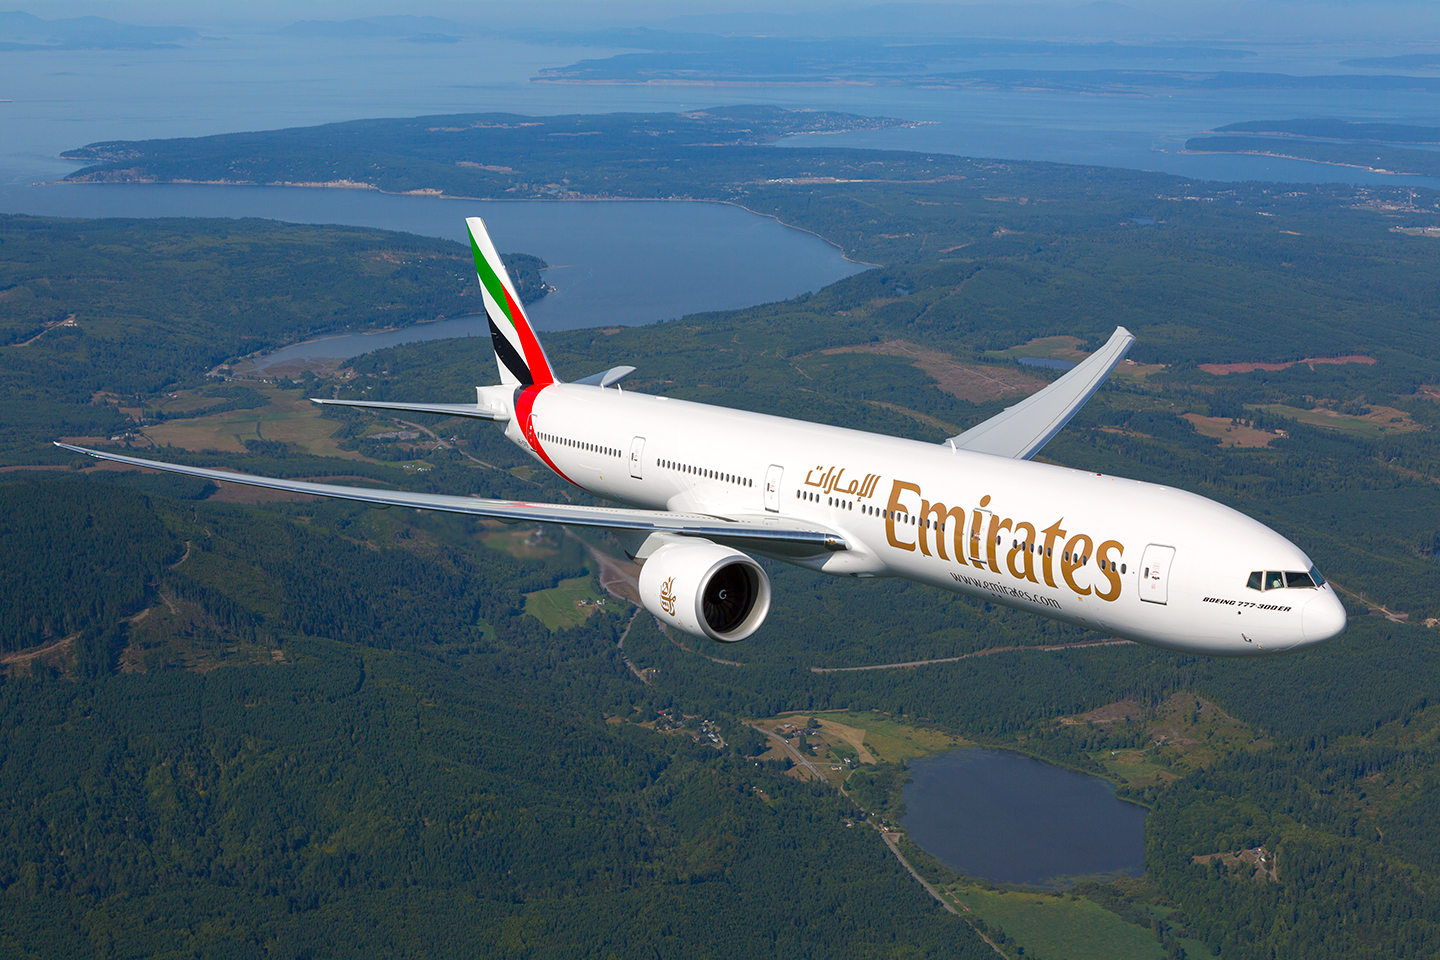 Emirates Can Now Send An Employee To Your Home To Check You In For A Flight